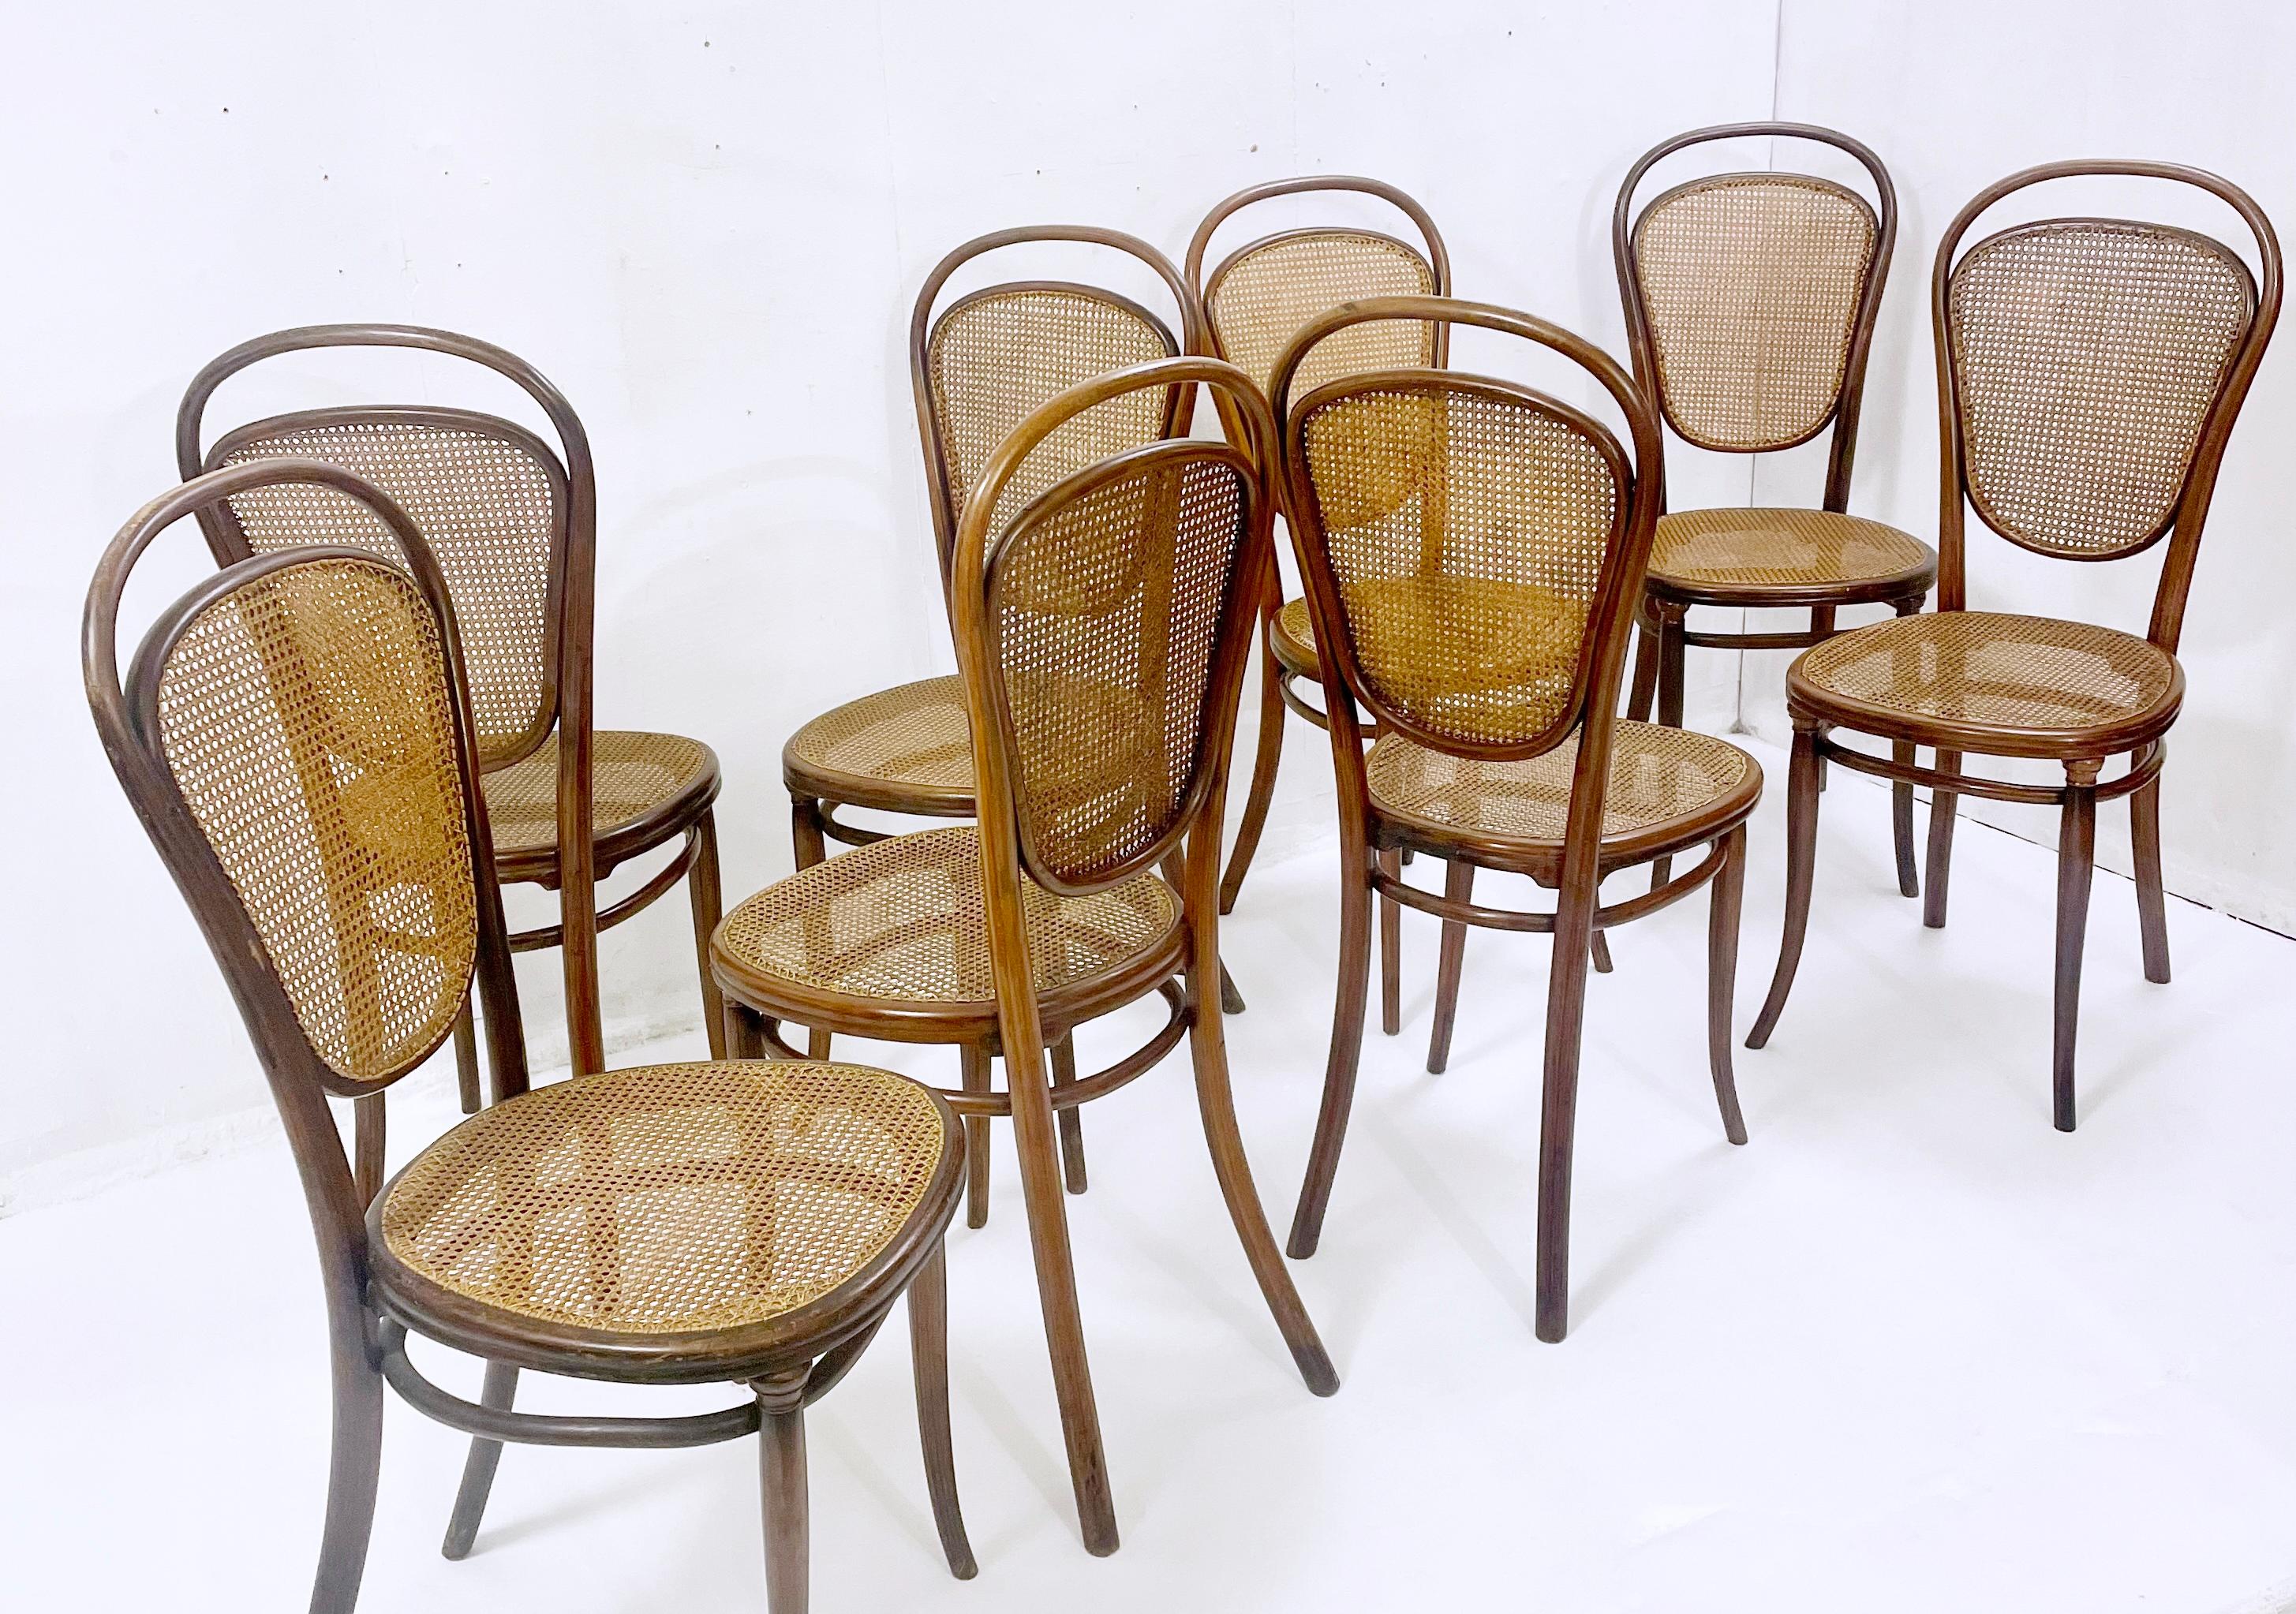 Set of 8 bentwood caning chairs by Thonet - Austria 1930s.